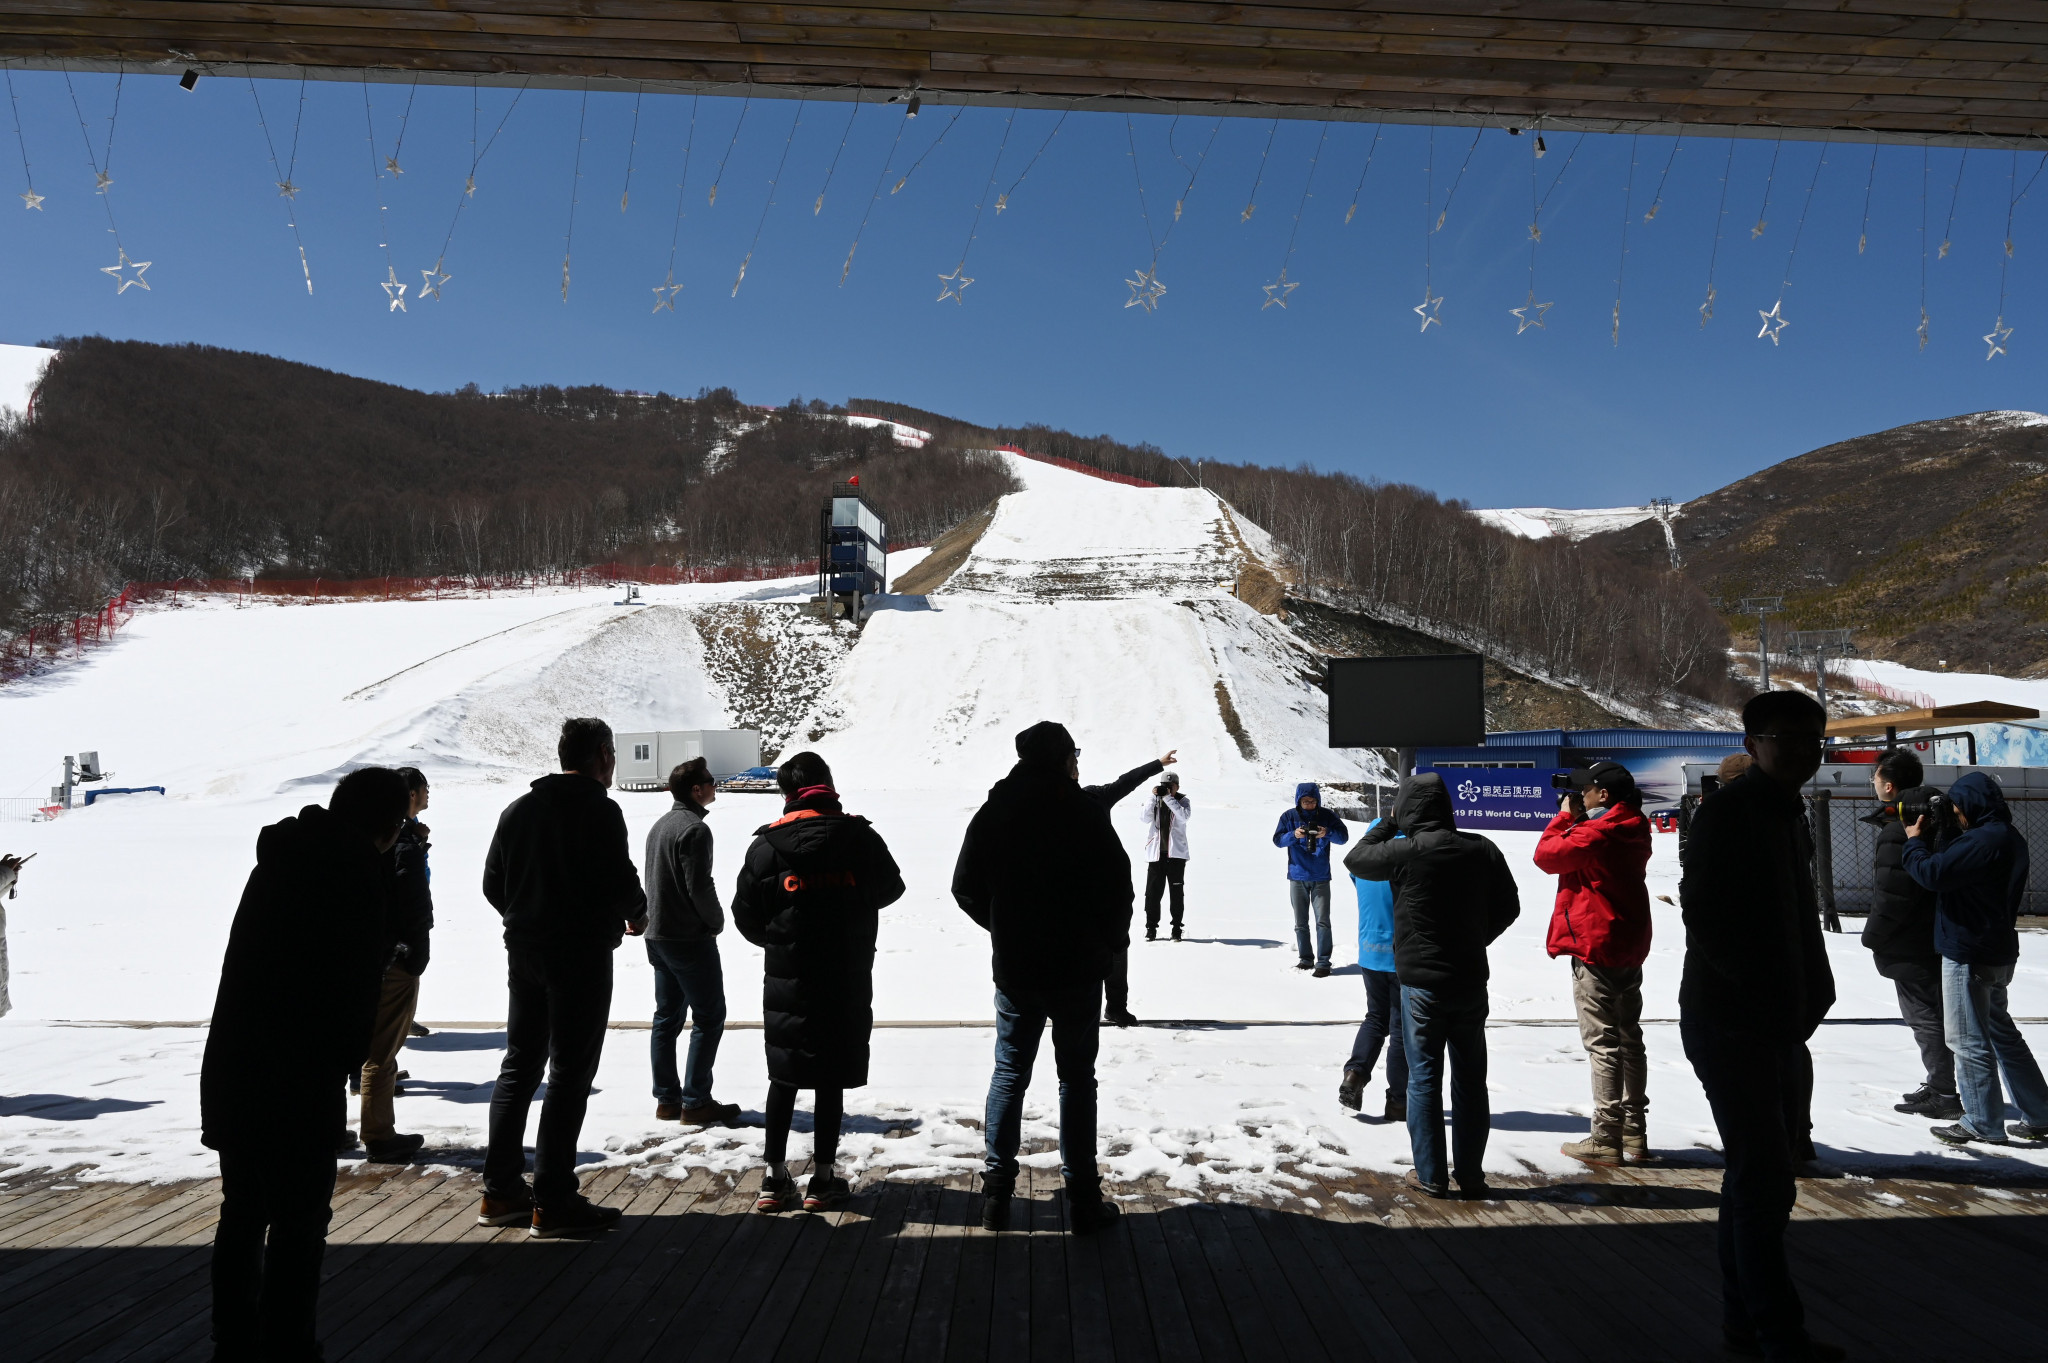 Biathlon competition will take place at the Zhangjiakou cluster during Beijing 2022 ©Getty Images